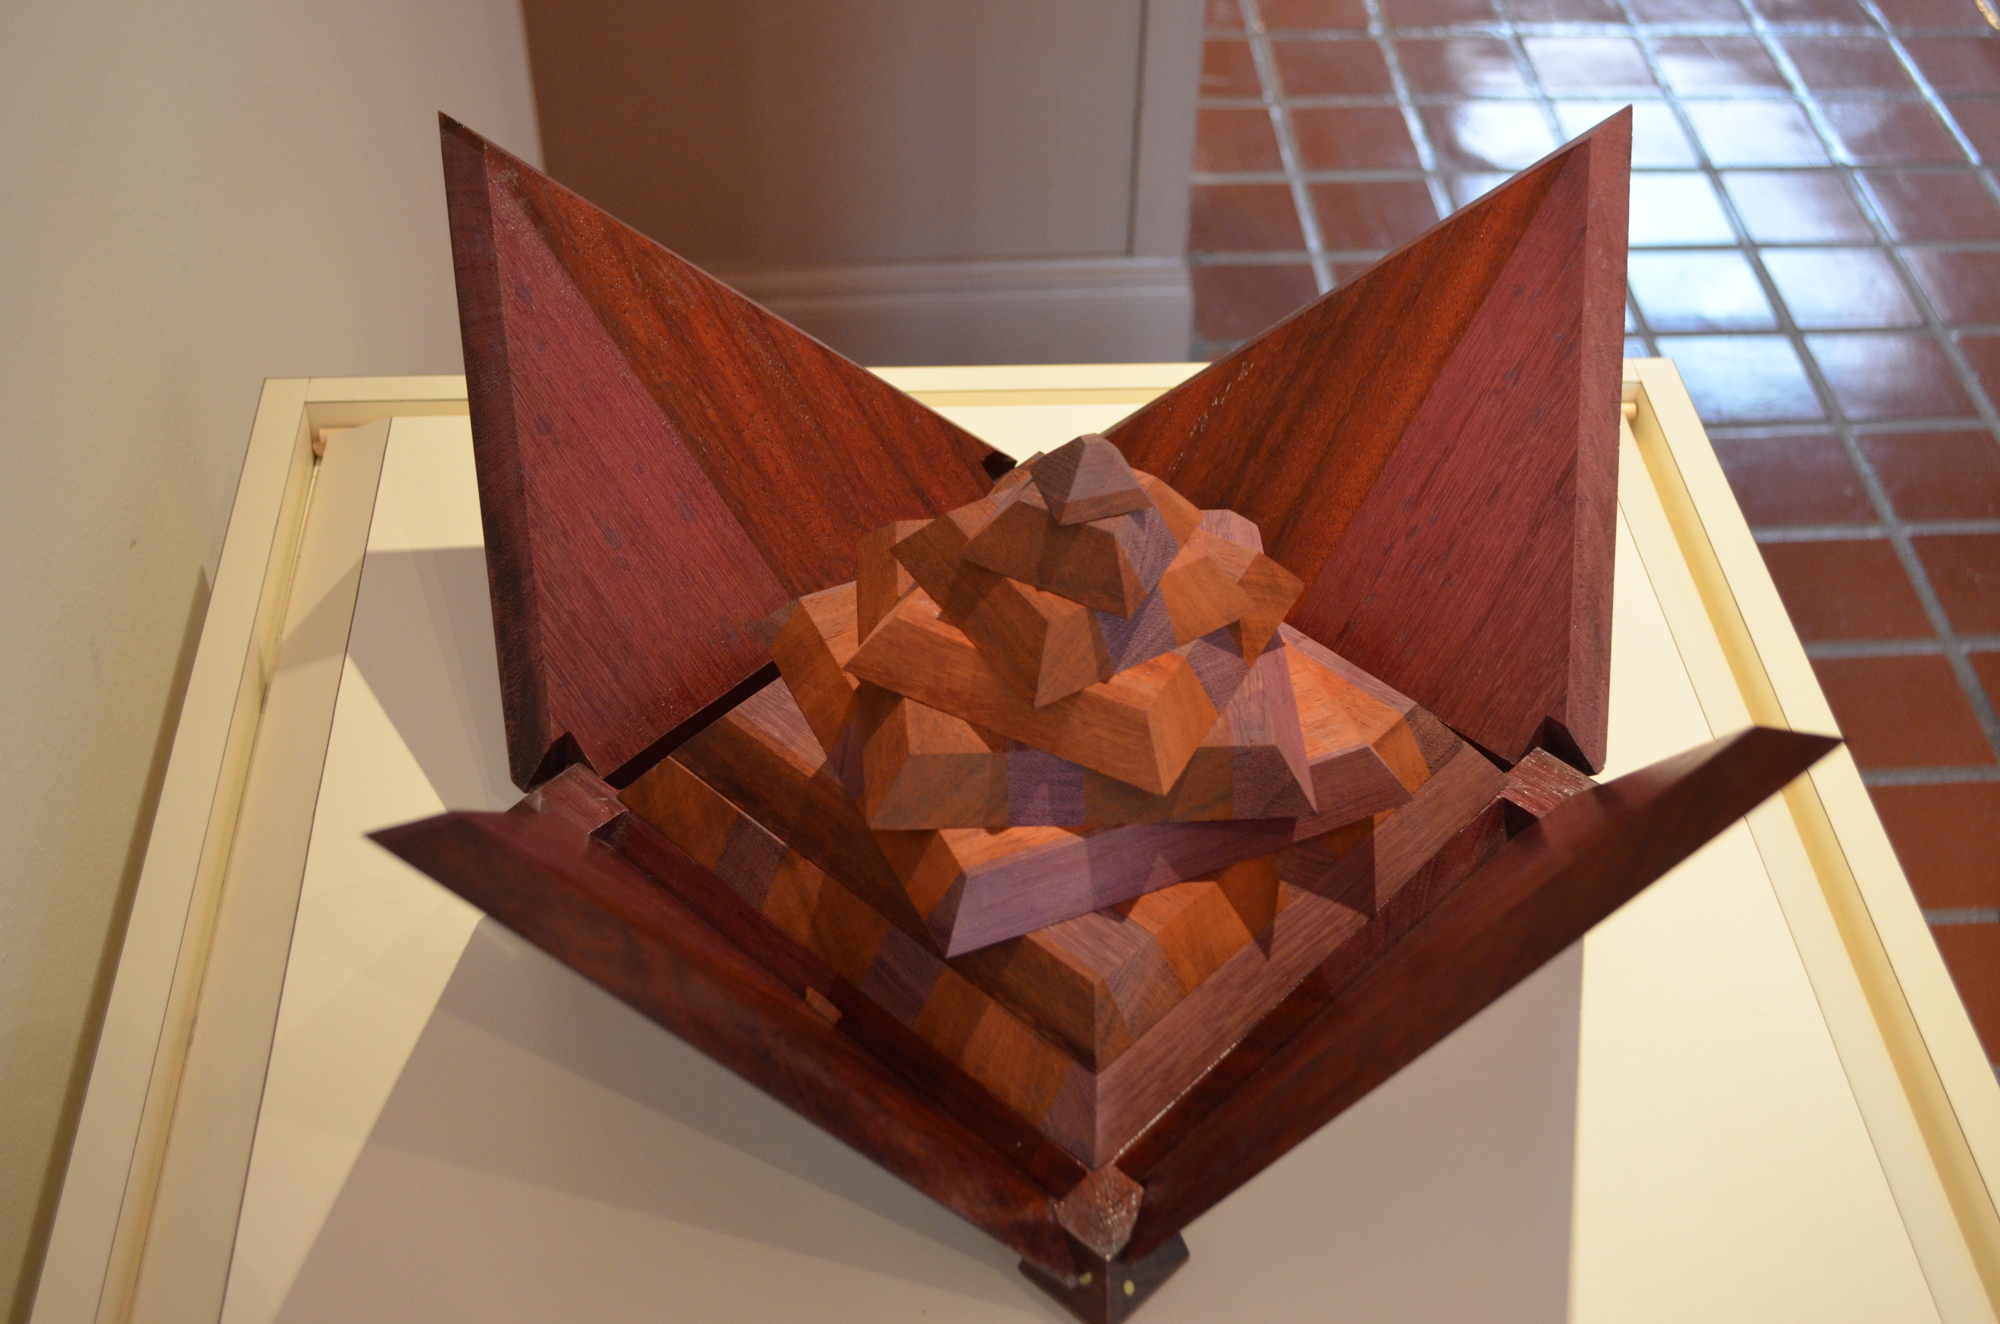 An industrial design piece that Pérez created during his time as a student at the Kansas City Art Institute. The whole thing moves like a puzzle, is made entirely of rainforest wood and is completely sustainable.